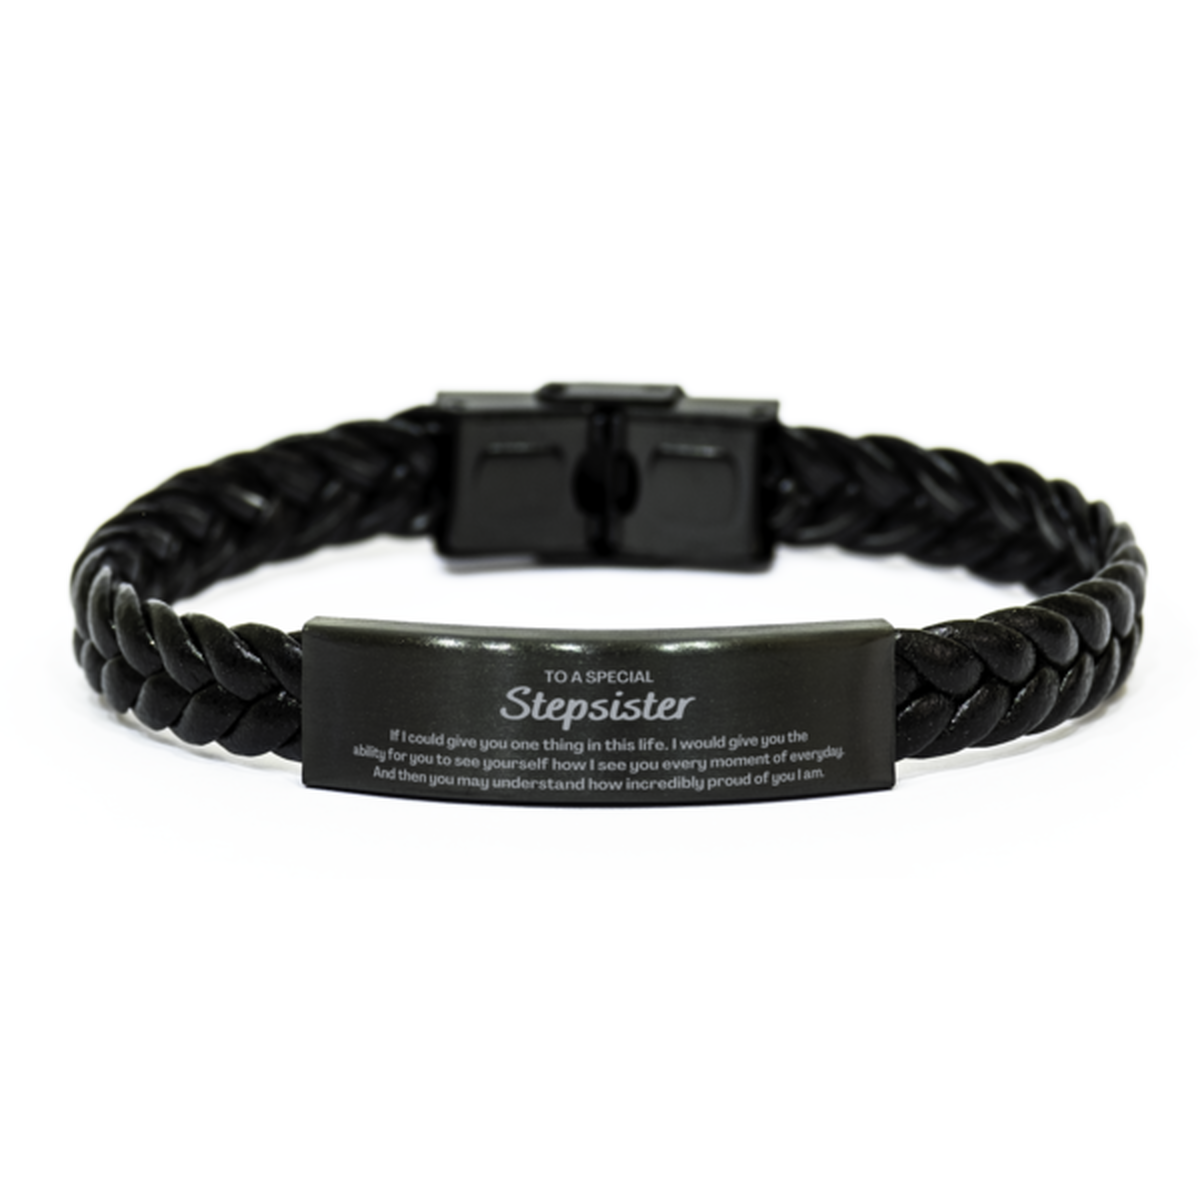 To My Stepsister Braided Leather Bracelet, Gifts For Stepsister Engraved, Inspirational Gifts for Christmas Birthday, Epic Gifts for Stepsister To A Special Stepsister how incredibly proud of you I am